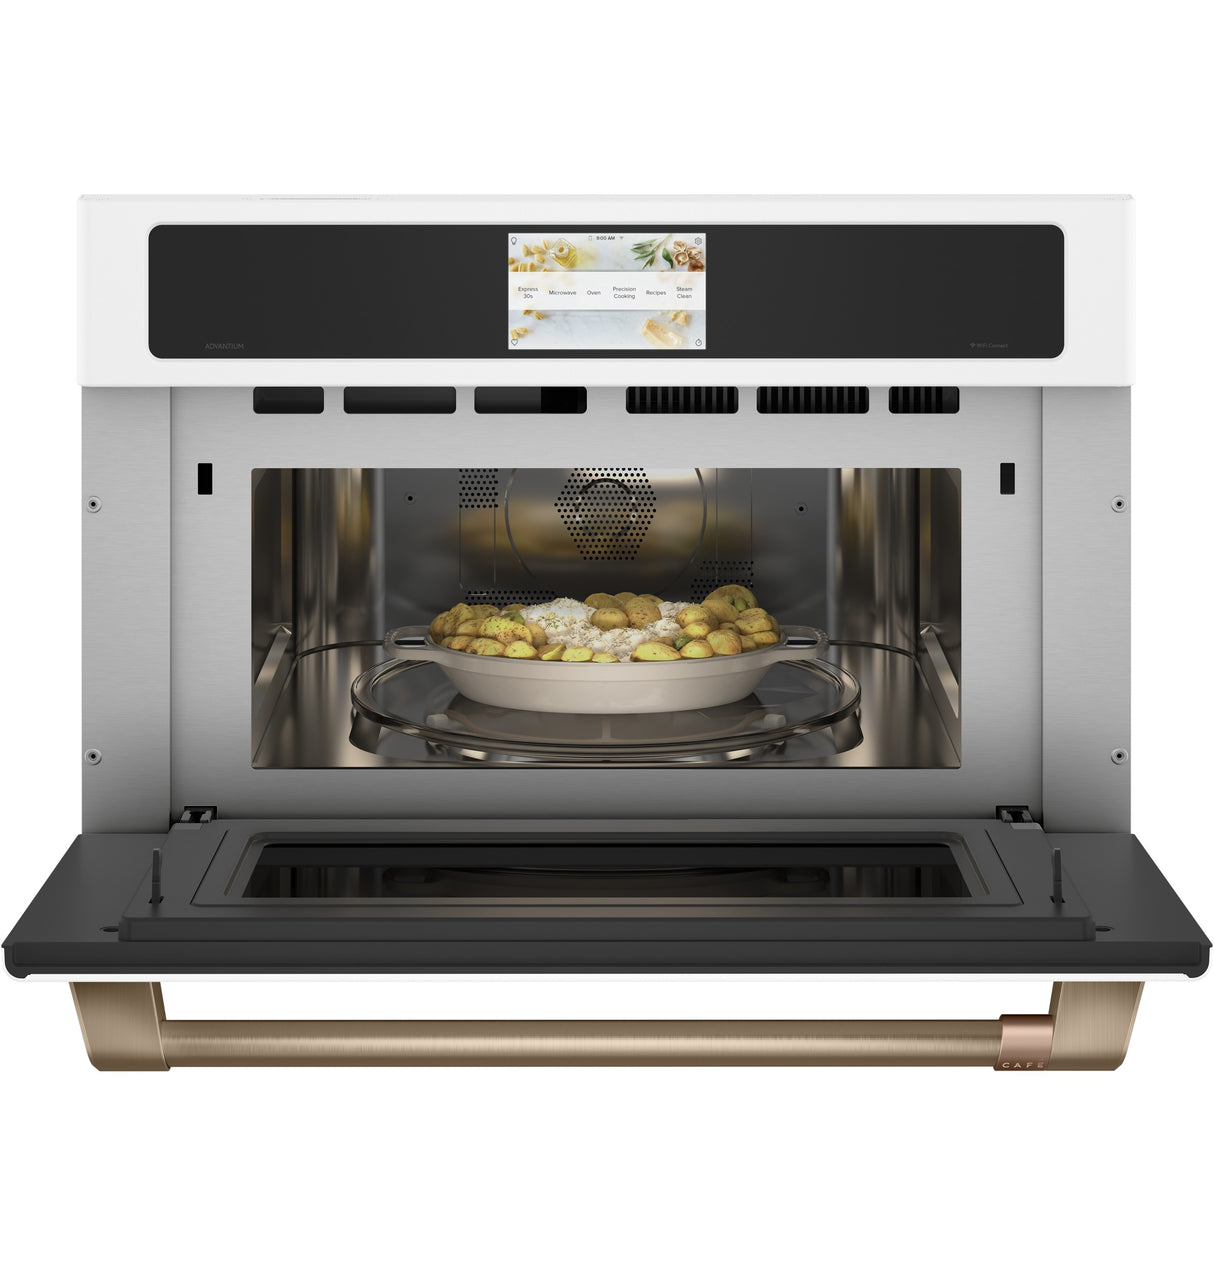 Caf(eback)(TM) 30" Smart Five in One Oven with 120V Advantium(R) Technology - (CSB913P4NW2)